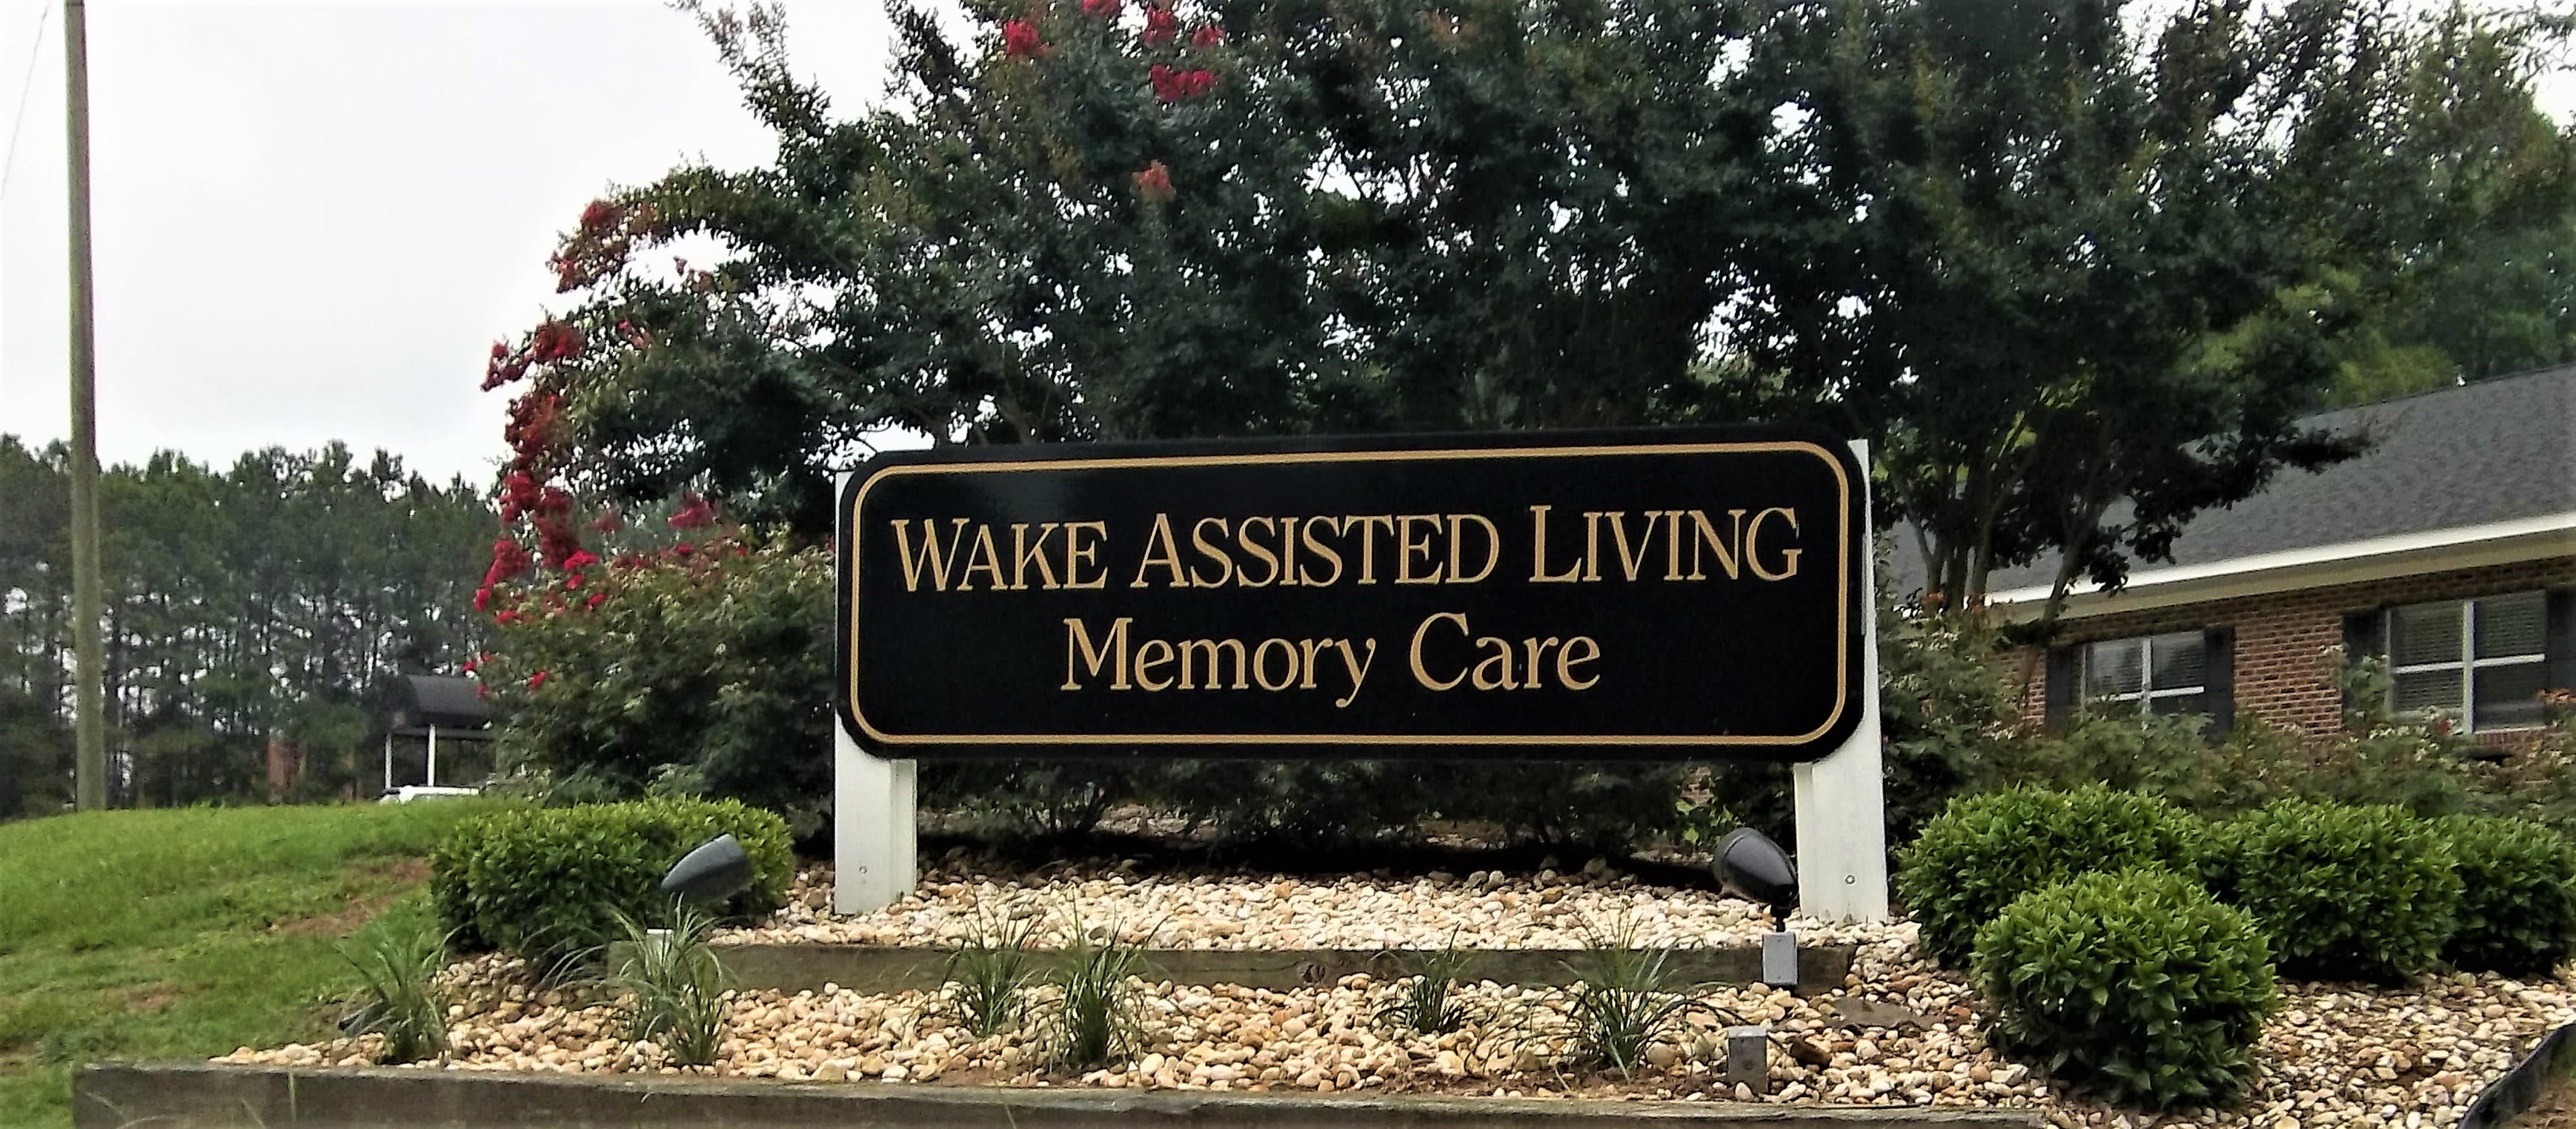 Wake Assisted Living Memory Care